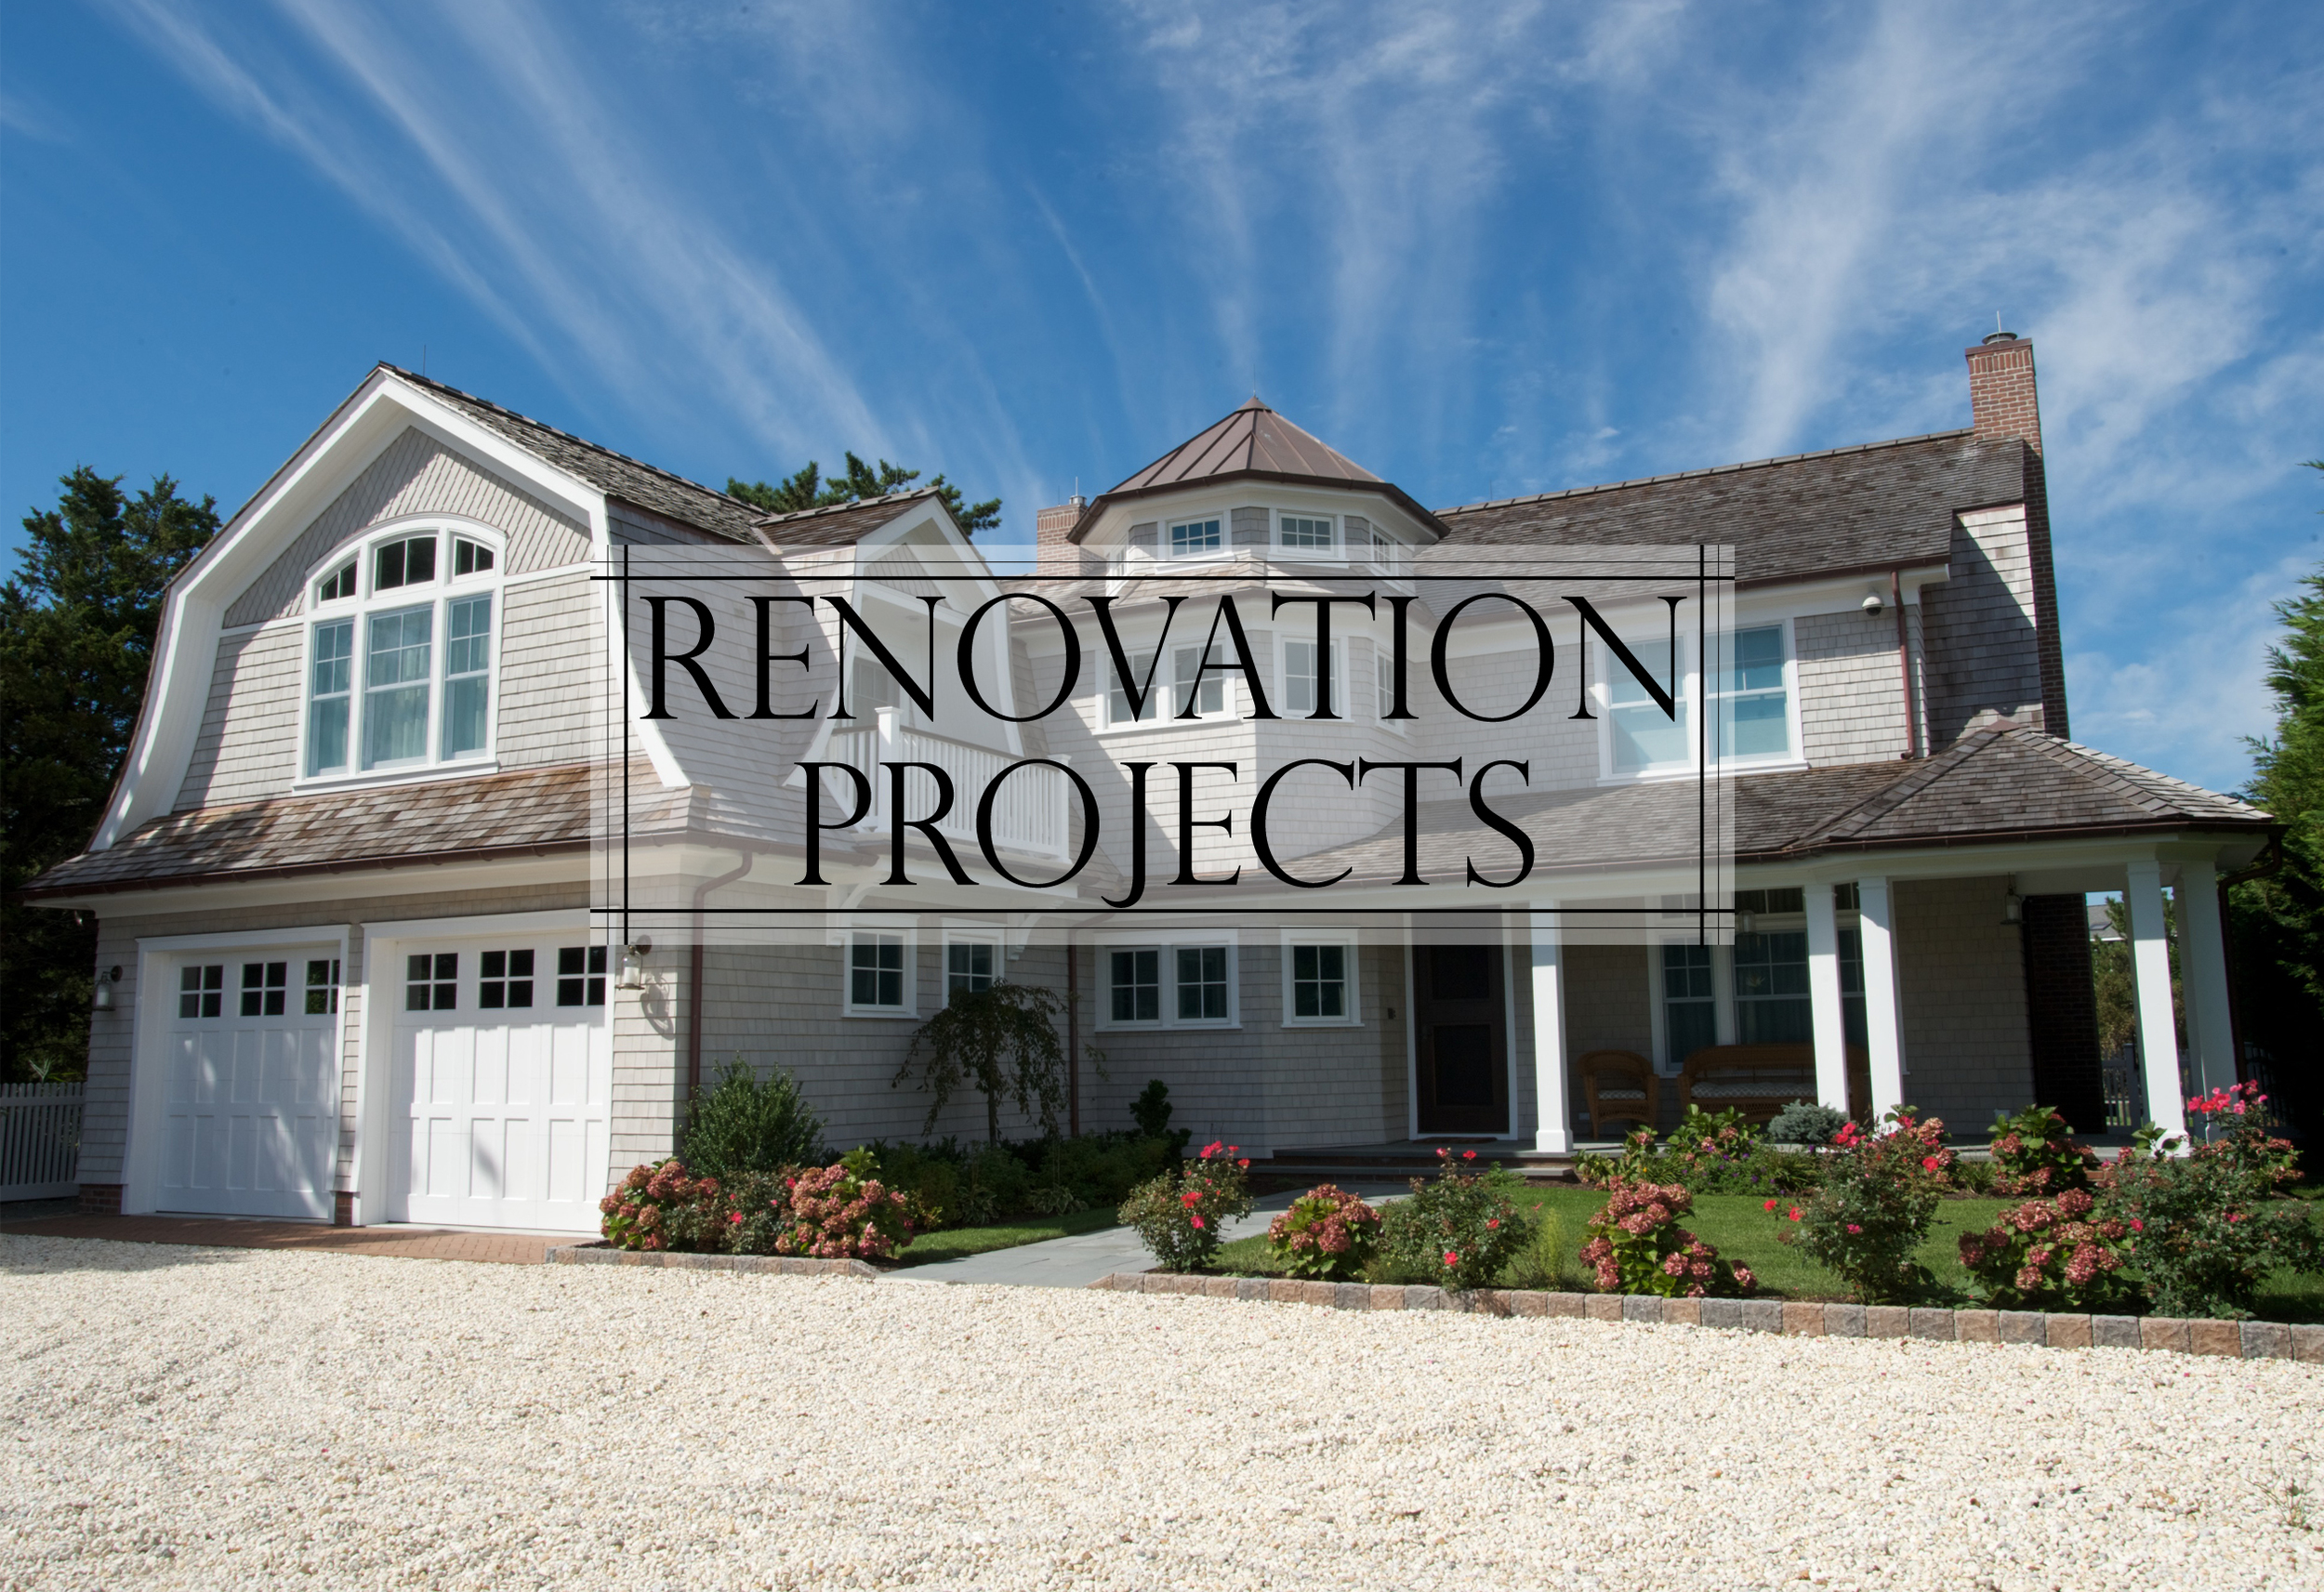 Renovation Projects title pic copy.jpg